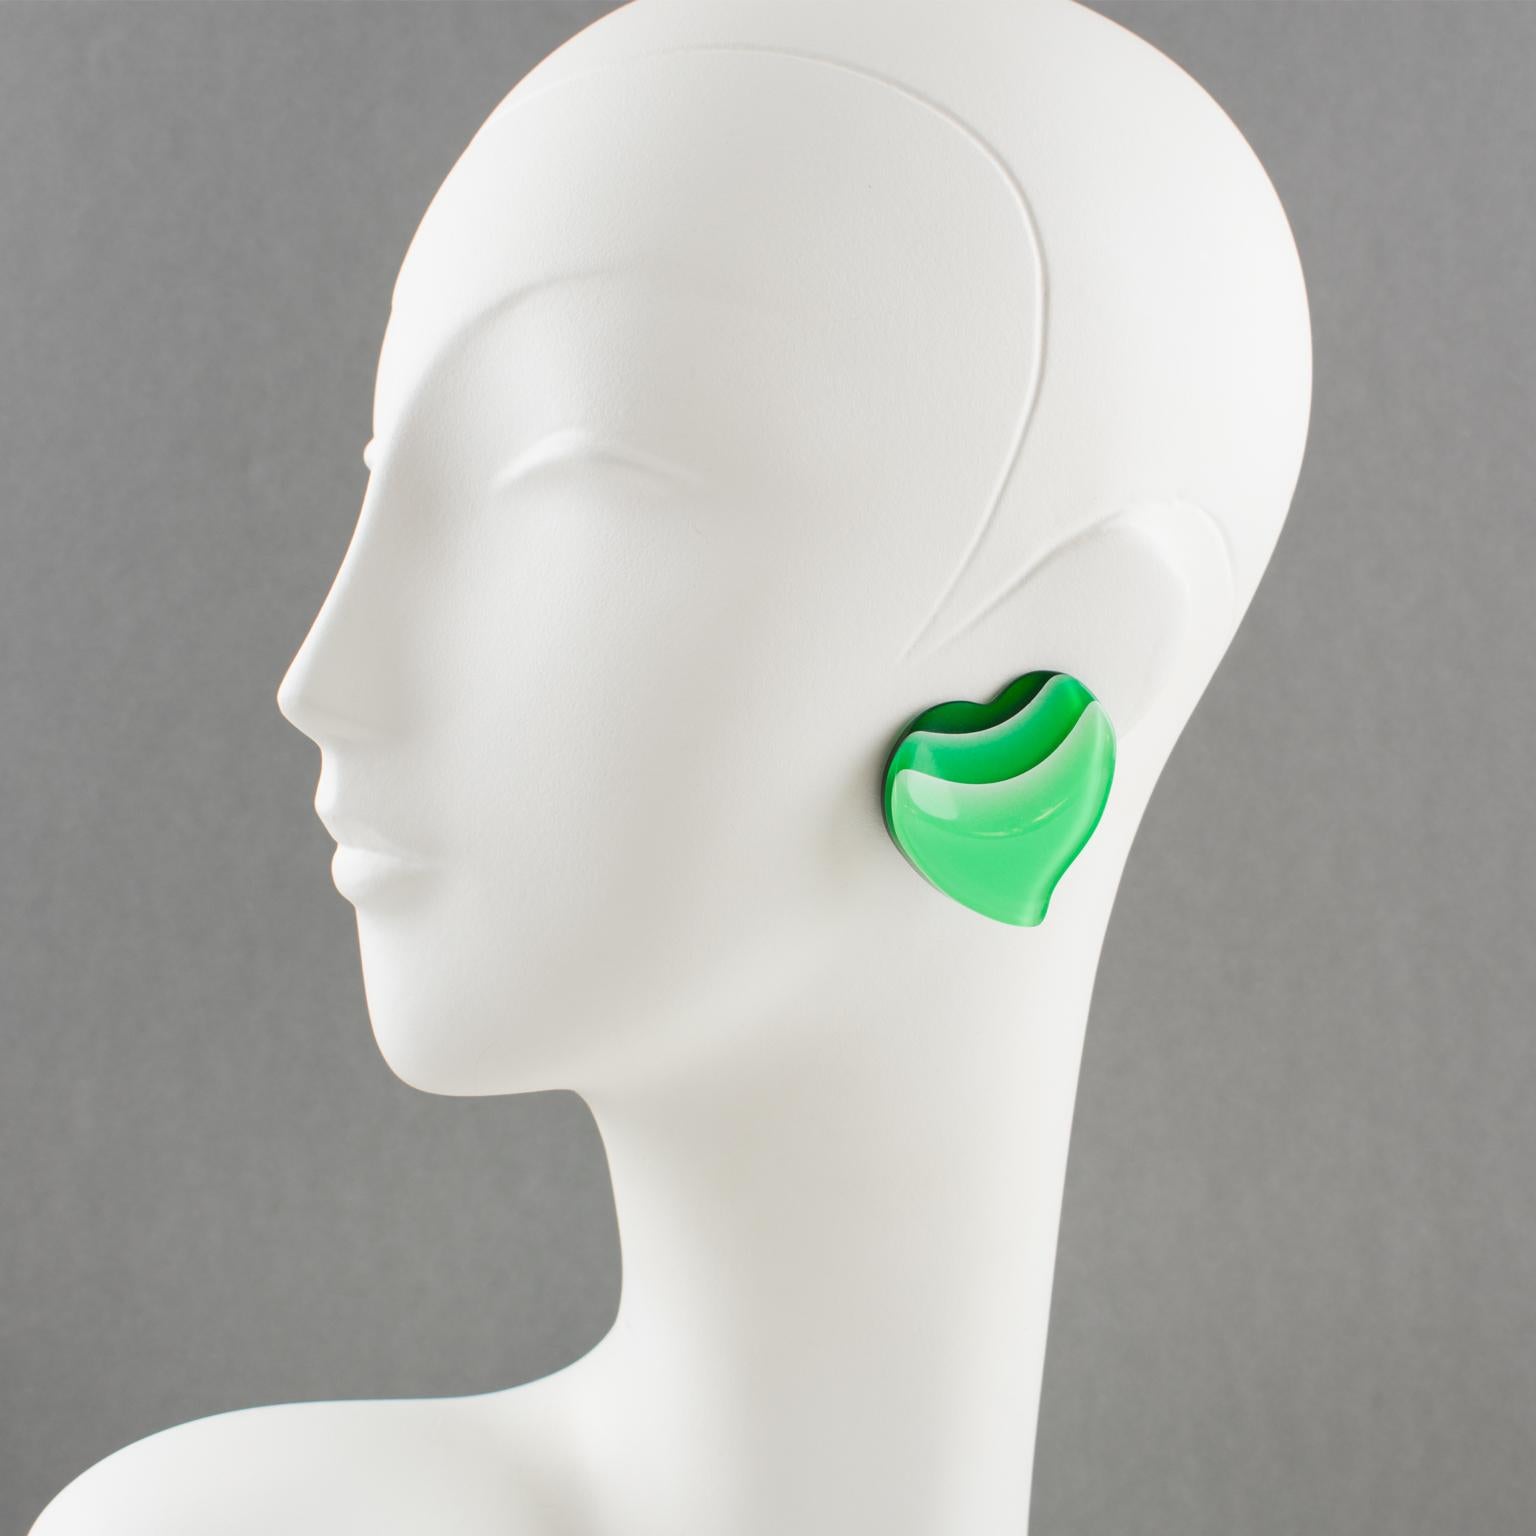 Lovely 1960s oversized Lucite clip-on earrings. Features a large carved heart shape with lamination. Transparent forest green color background shaded to green grass and aqua green bright colors. There is no visible maker's mark.
Measurements: 1.57